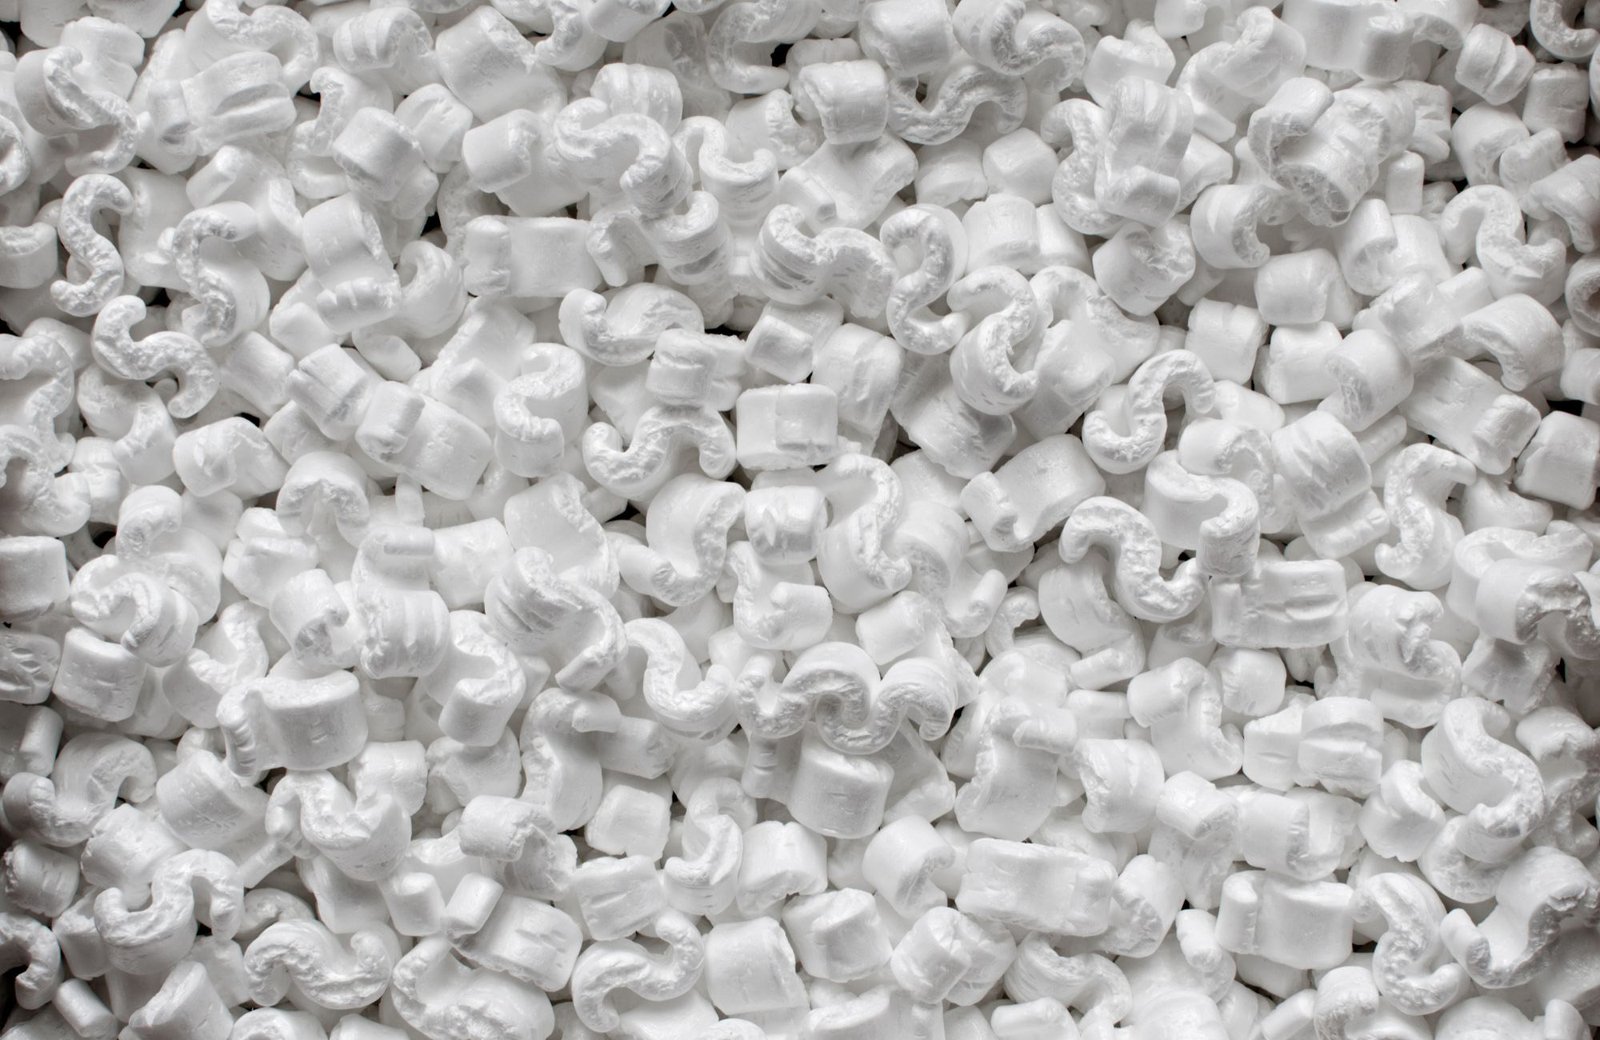 Breakthrough Enzyme Discovery Could Make Widely Used Plastic Polystyrene Biodegradable